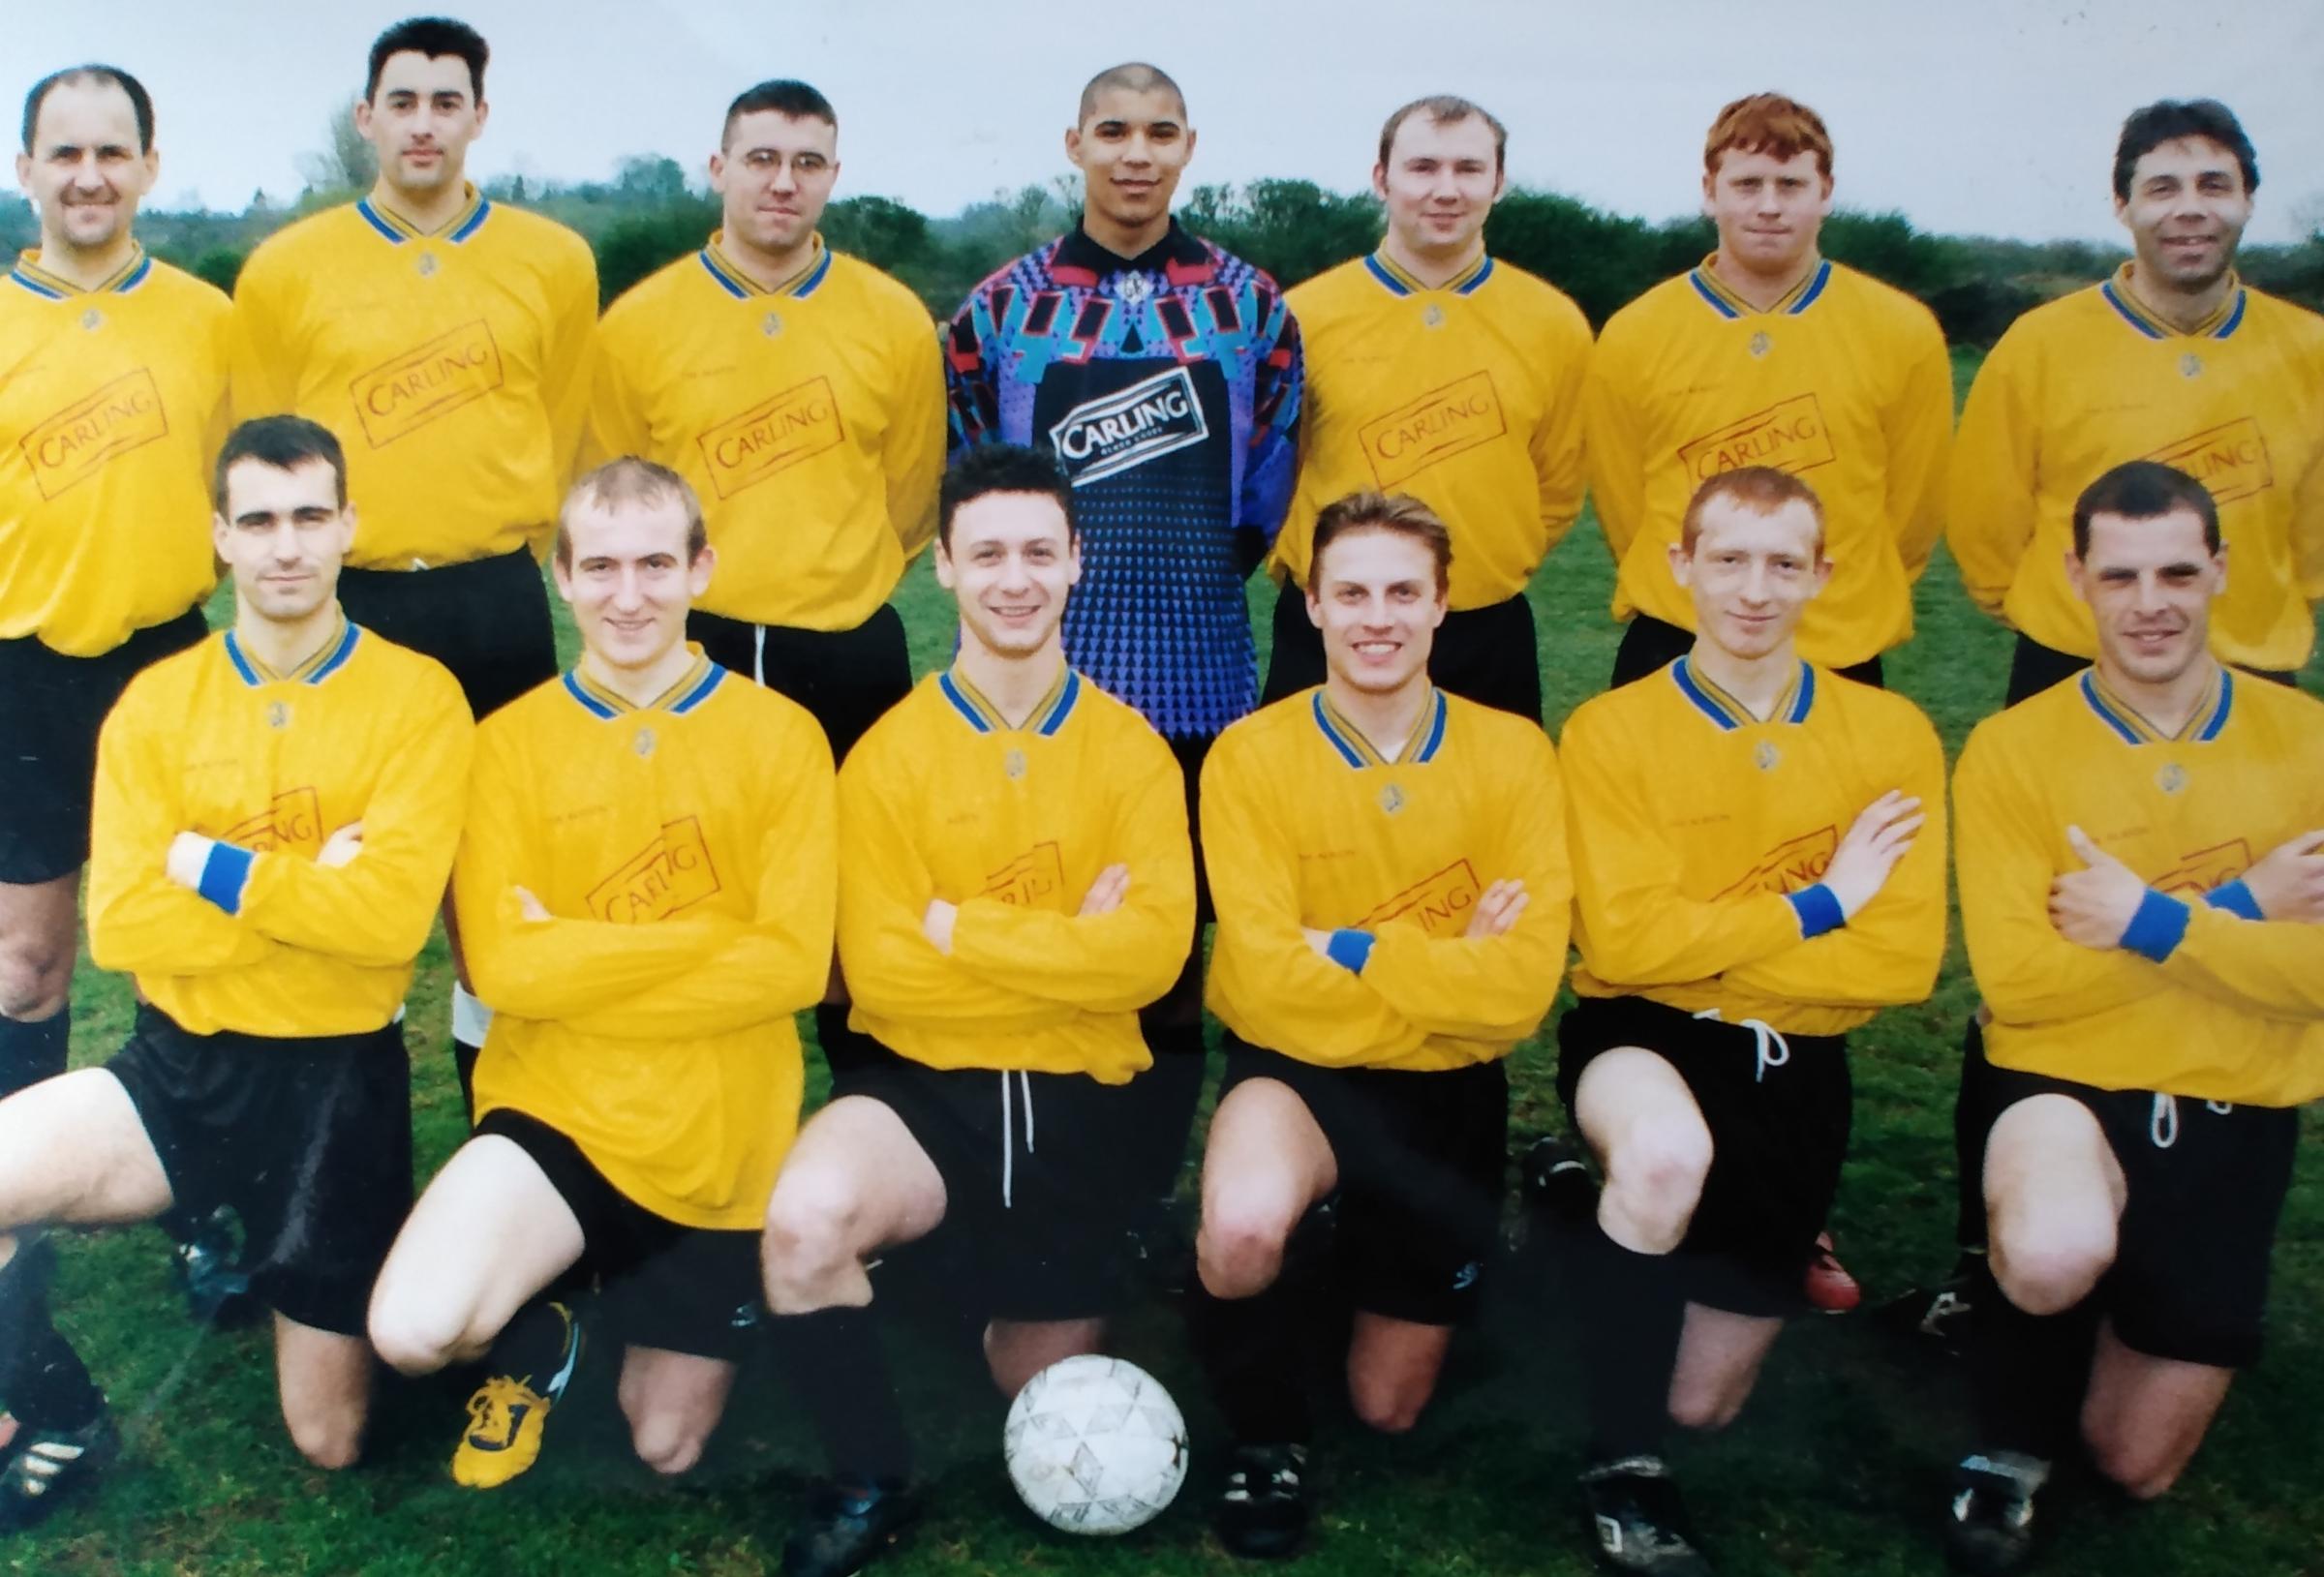 The Albion line-up in April 1999 before their 1-1 draw with GPO Rangers in a Worcester and District Sunday League Division One match. Did you come up against any of these players?